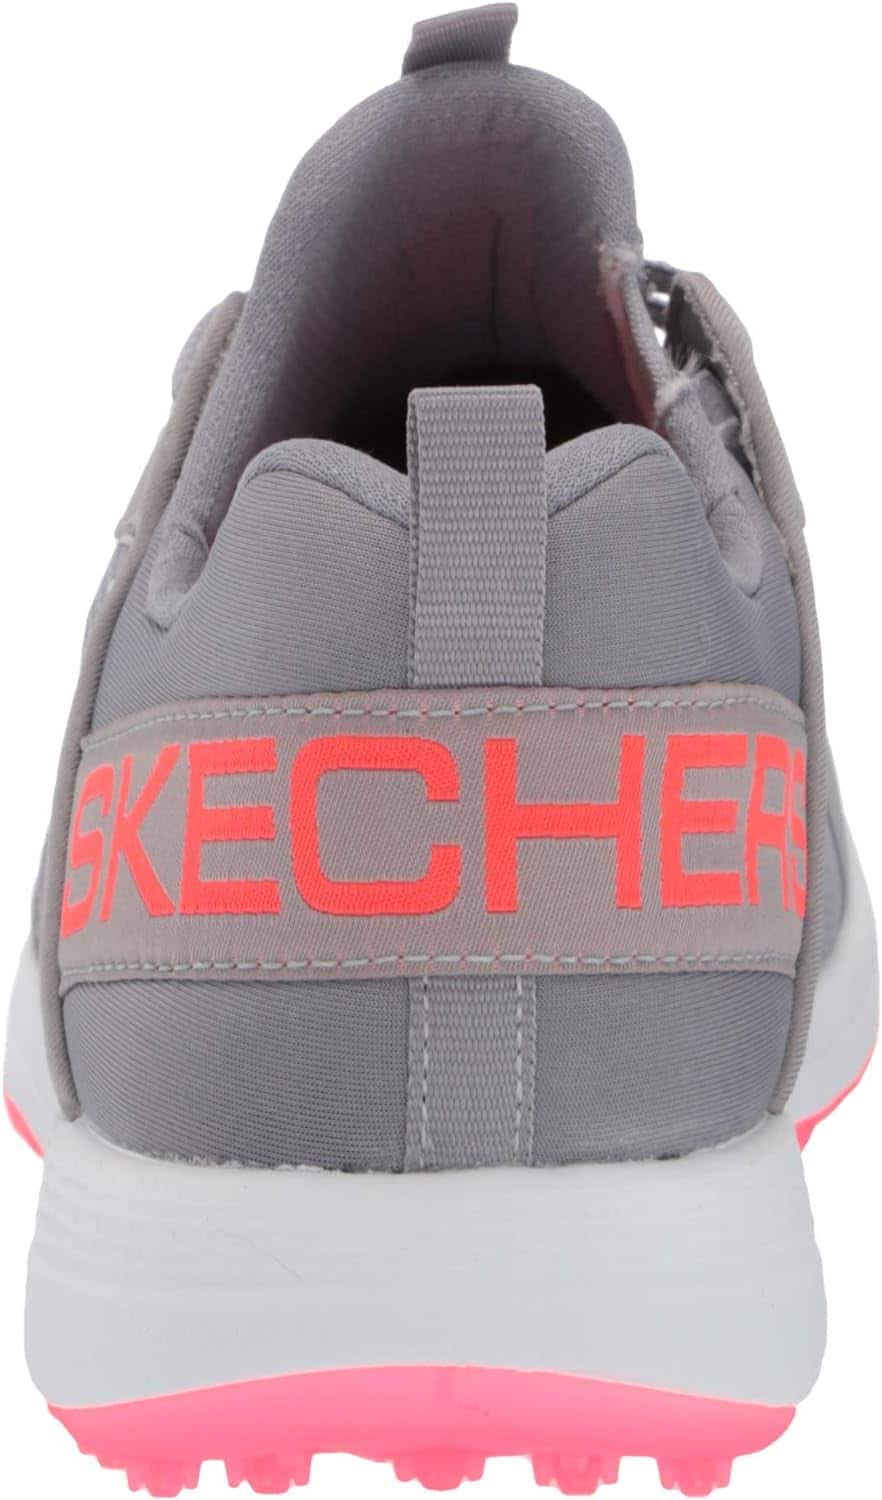 Skechers Women's Max Golf Shoe: The Perfect Blend of Style and Performance